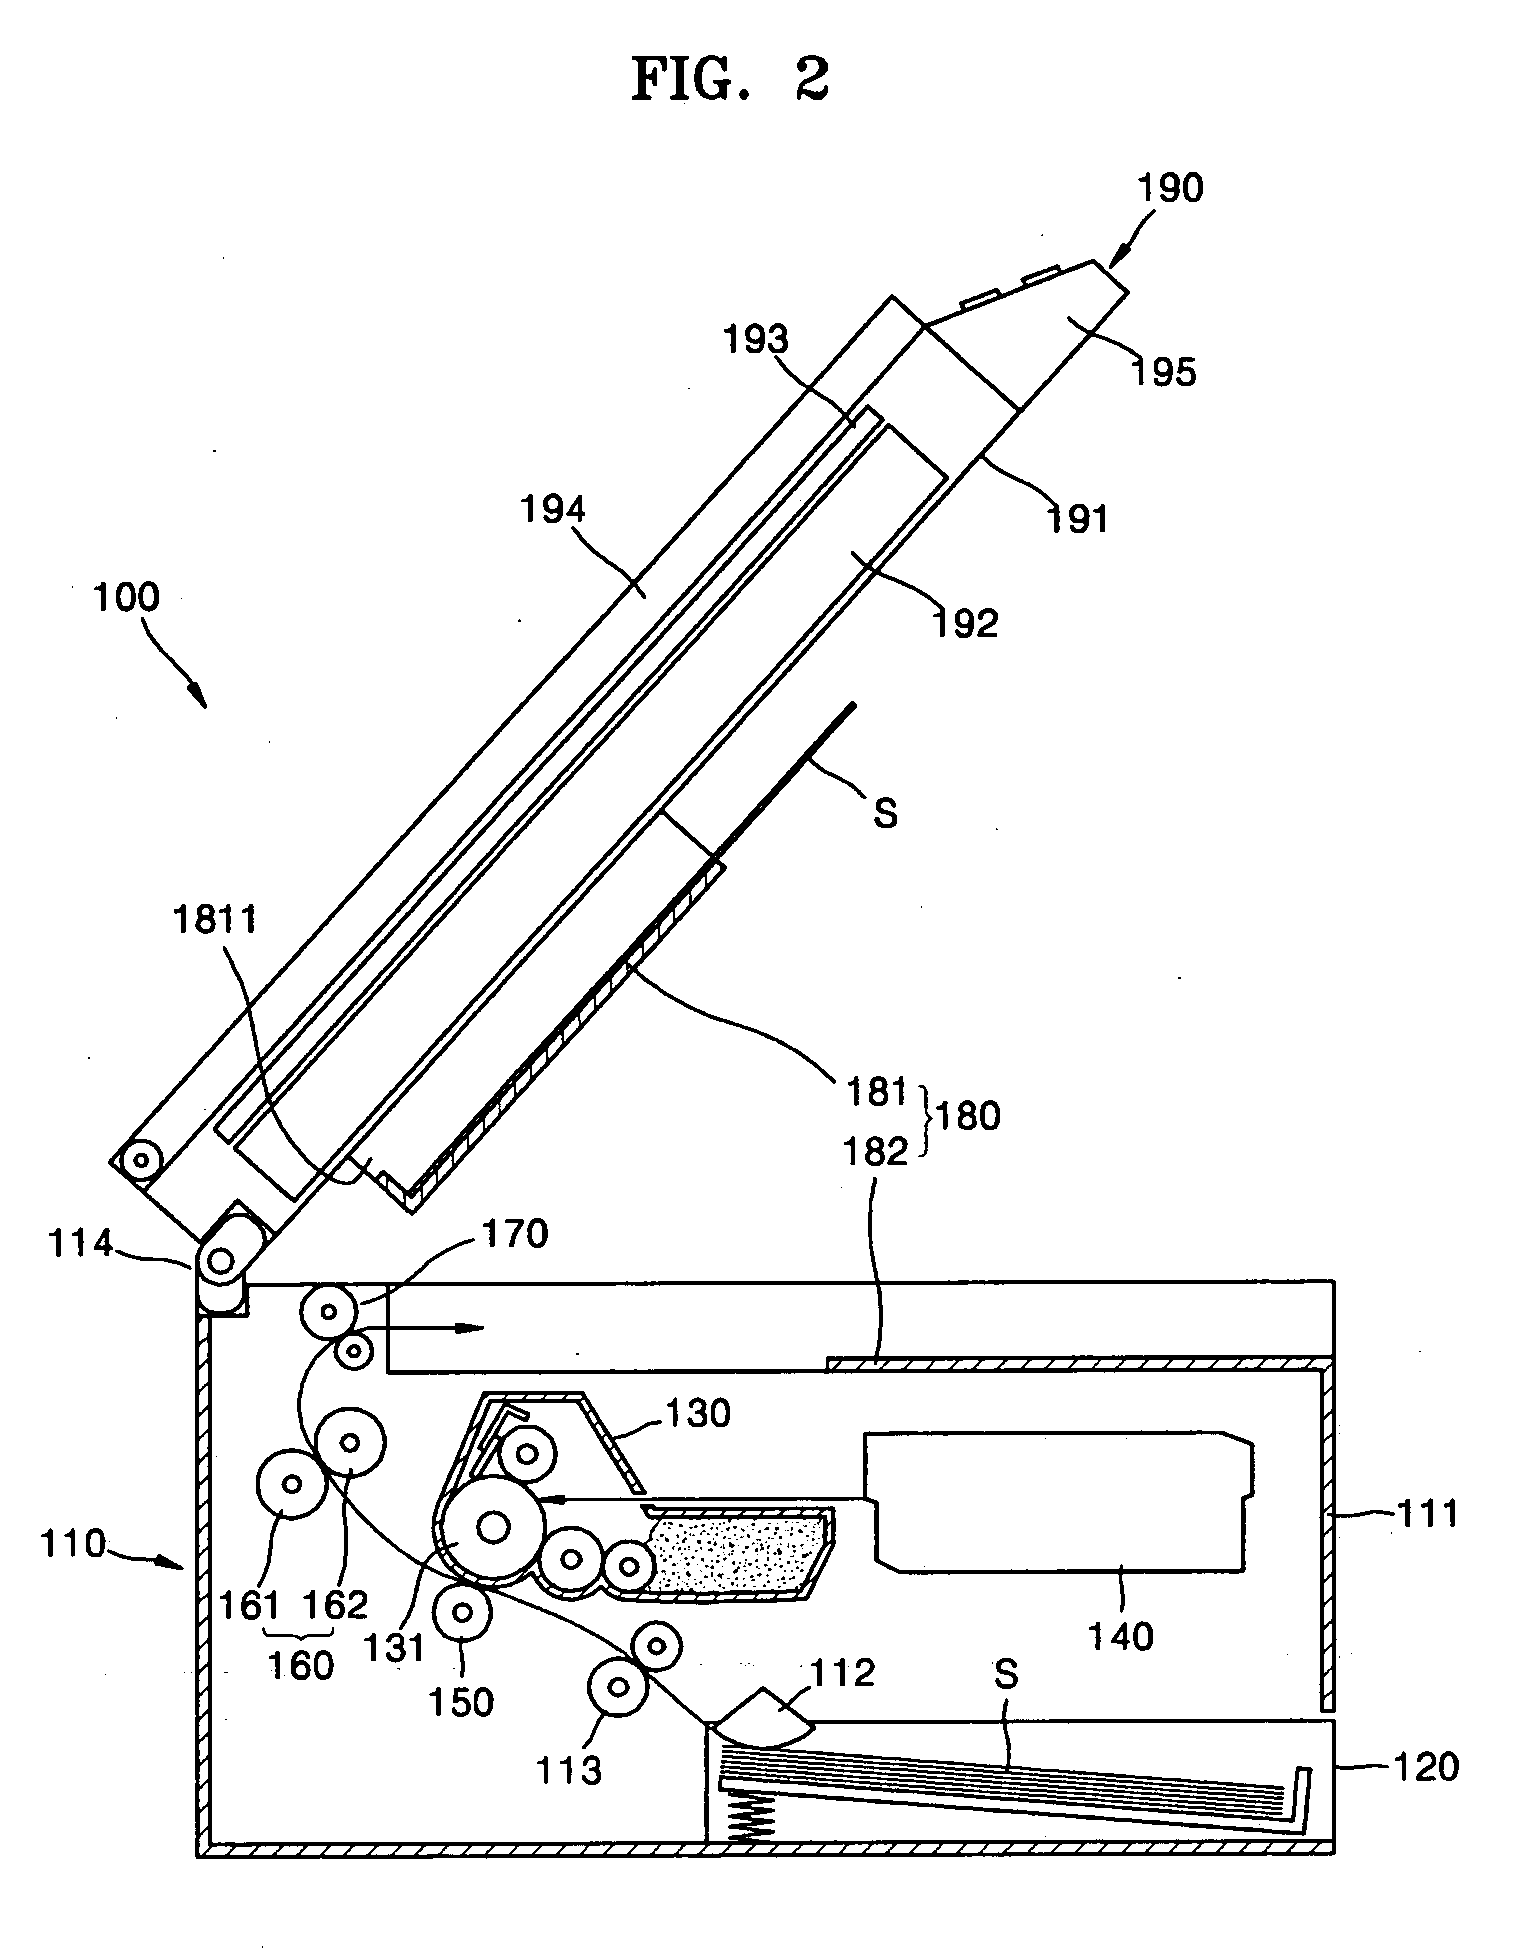 Multi-functional peripheral device